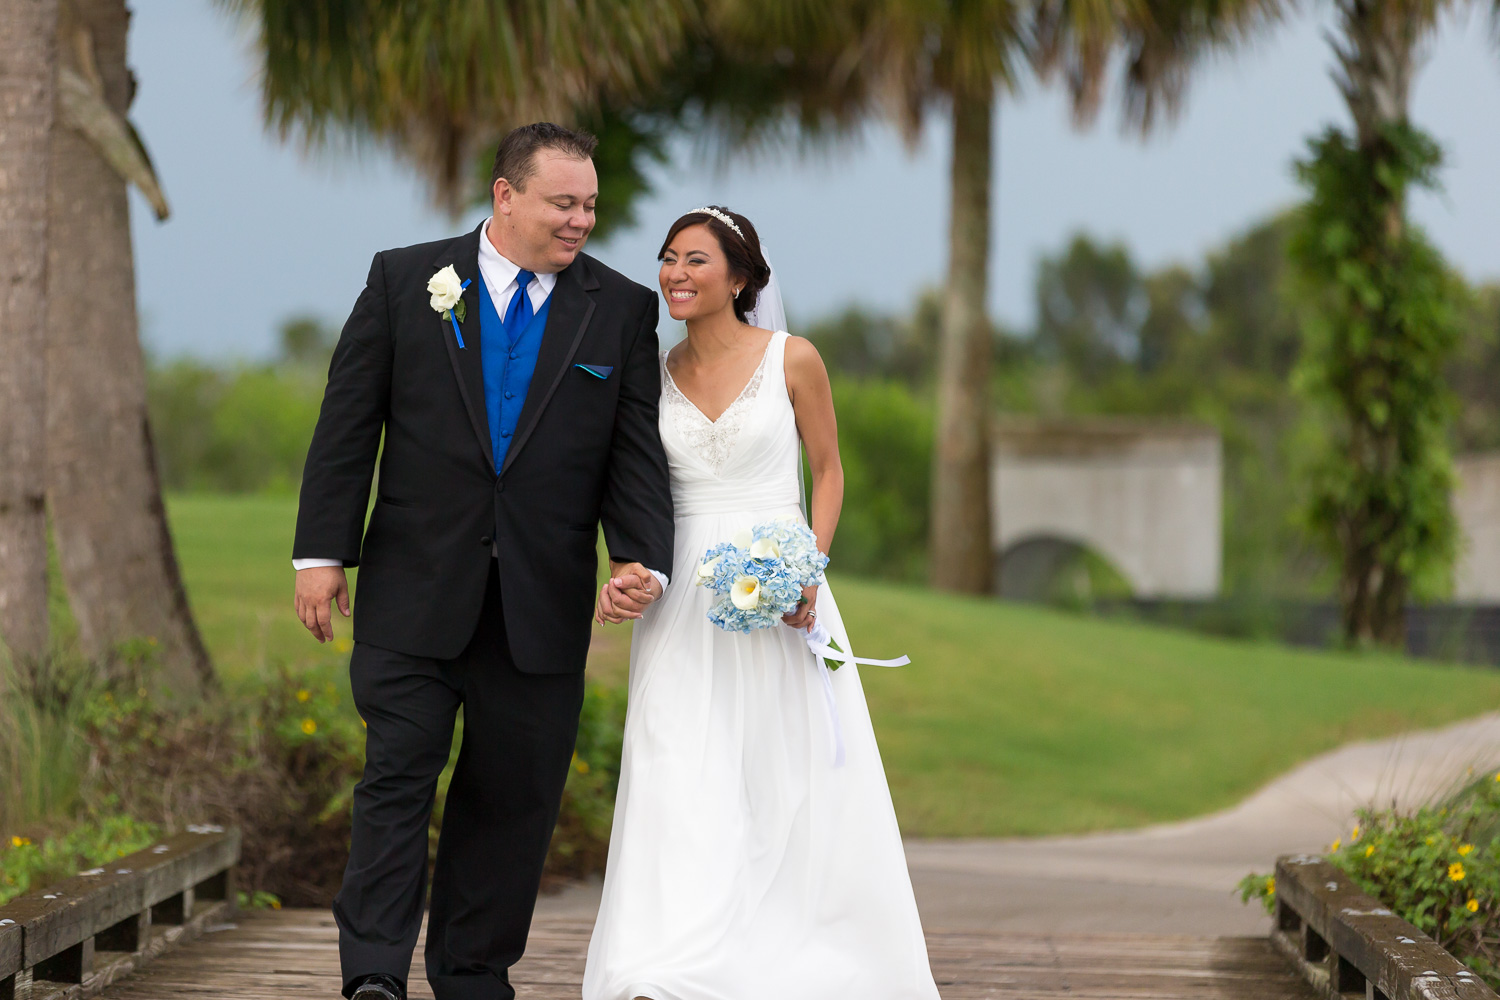   Steve McCarthy Photography: Premier SWFL Wedding Photographer serving all of SWFL  , from Tampa to Naples, Fort Myers Beach, Pine Island, Sanibel, Captiva and Marco Island and over to Miami and up to Delray Beach, including: Tampa, Sarasota, Venice